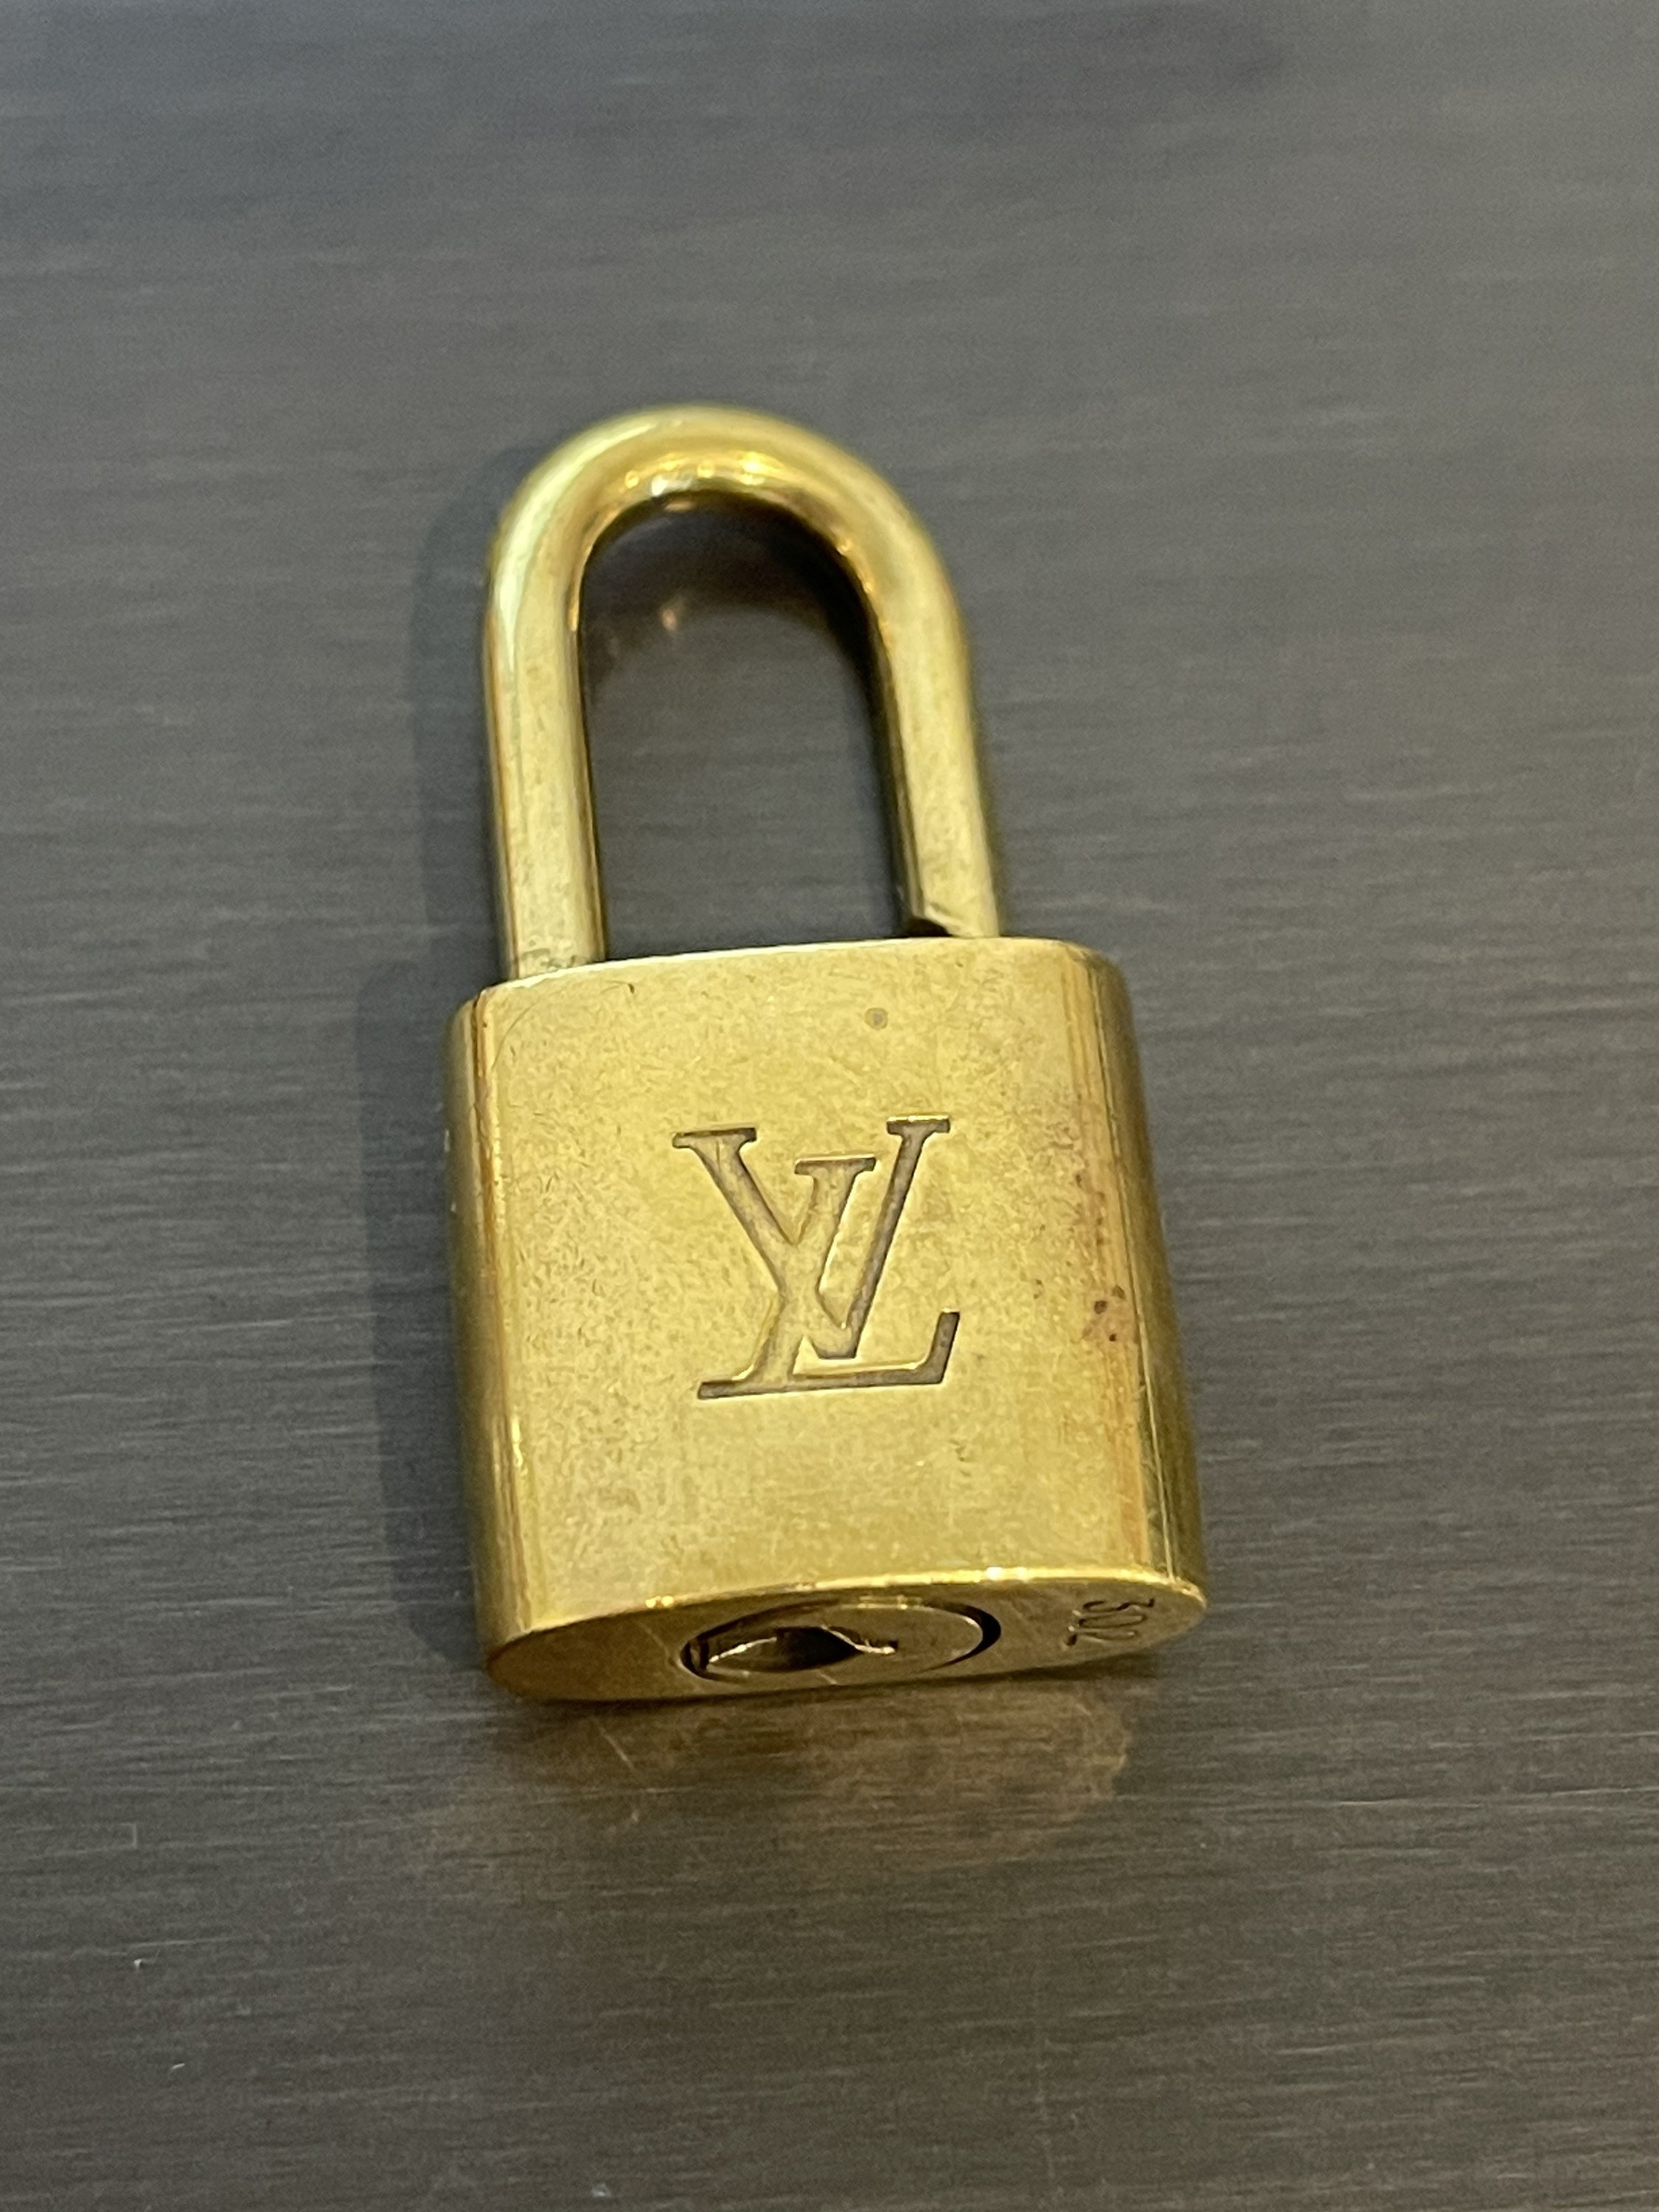 Pinkerly Special Louis Vuitton Padlock and One Key 302 Lock 